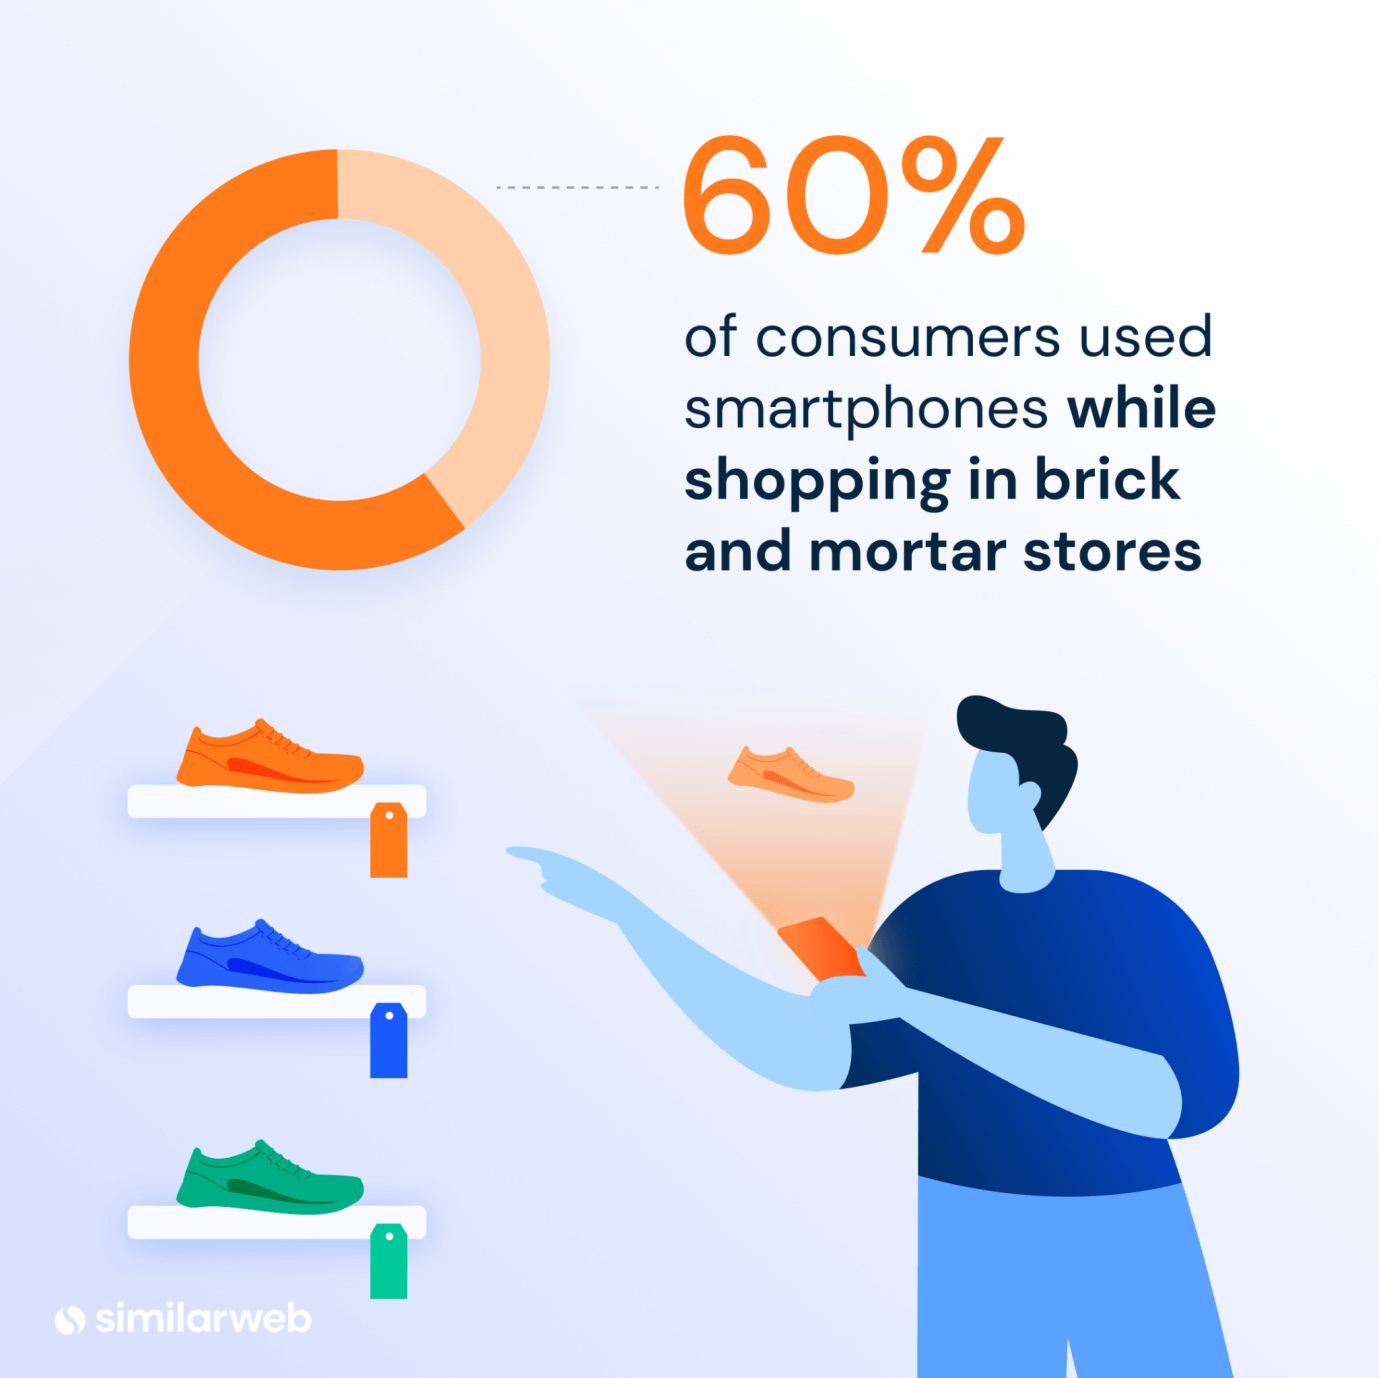 60% consumers used smartphones while shopping in brick and mortar stores.